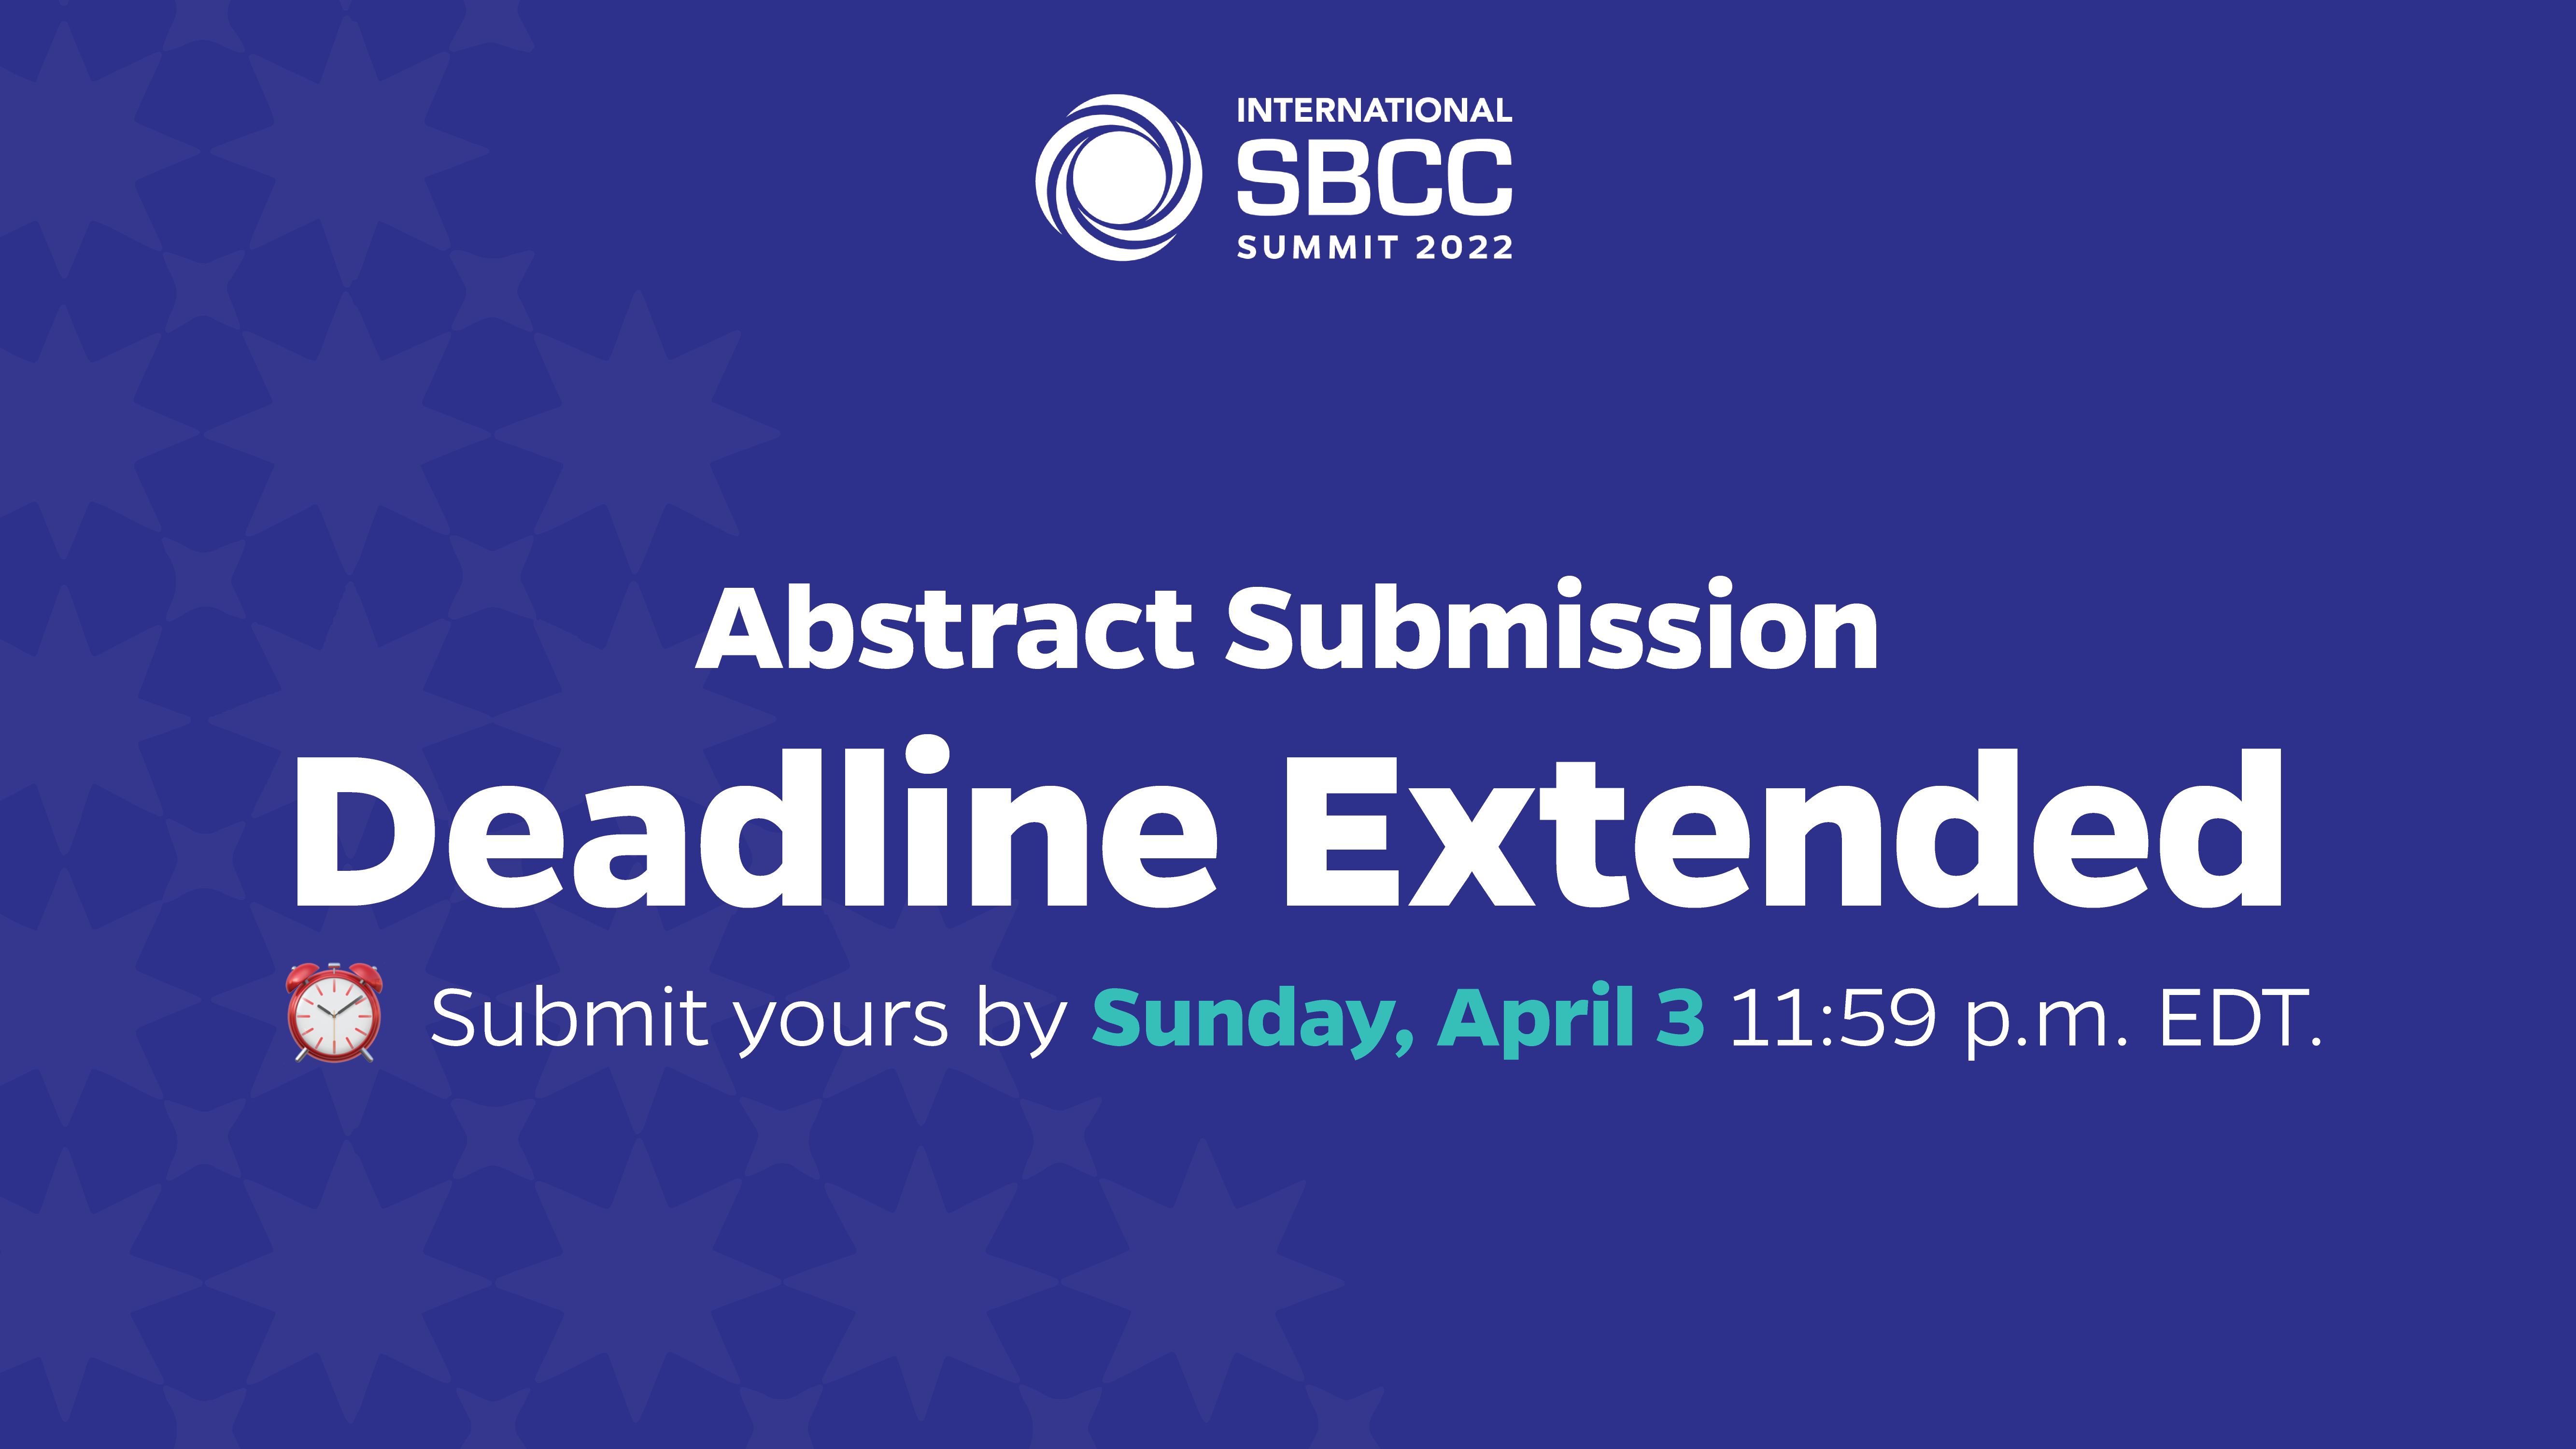 Abstract Submission Deadline Extended International SBCC Summit